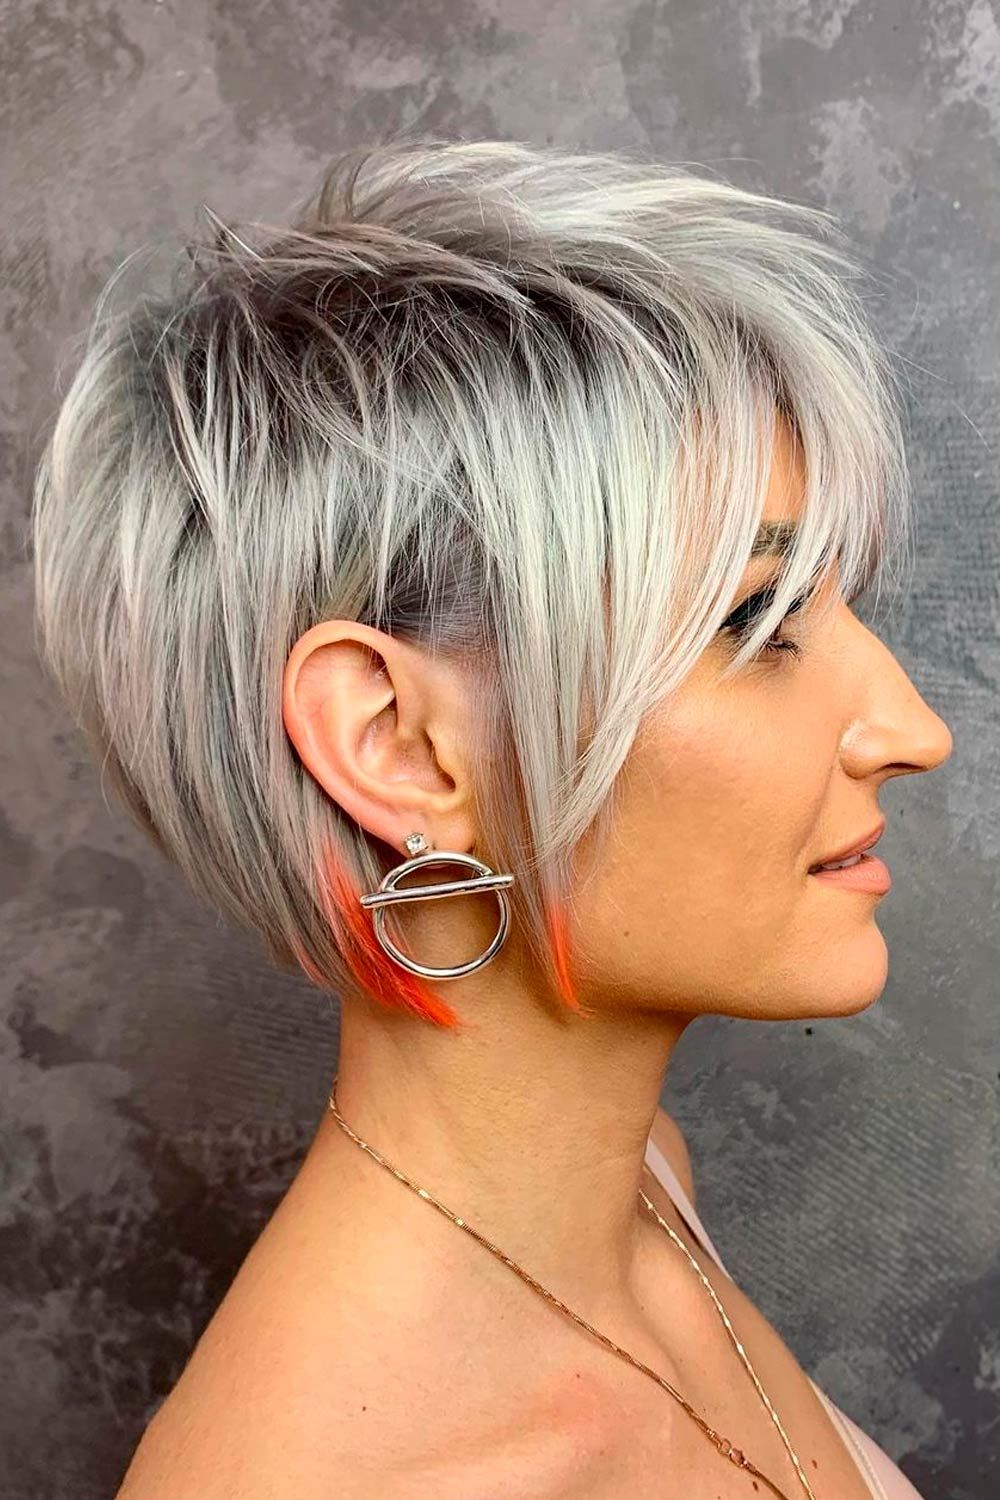 27 Short Grey Hair Cuts and Styles | LoveHairStyles.com